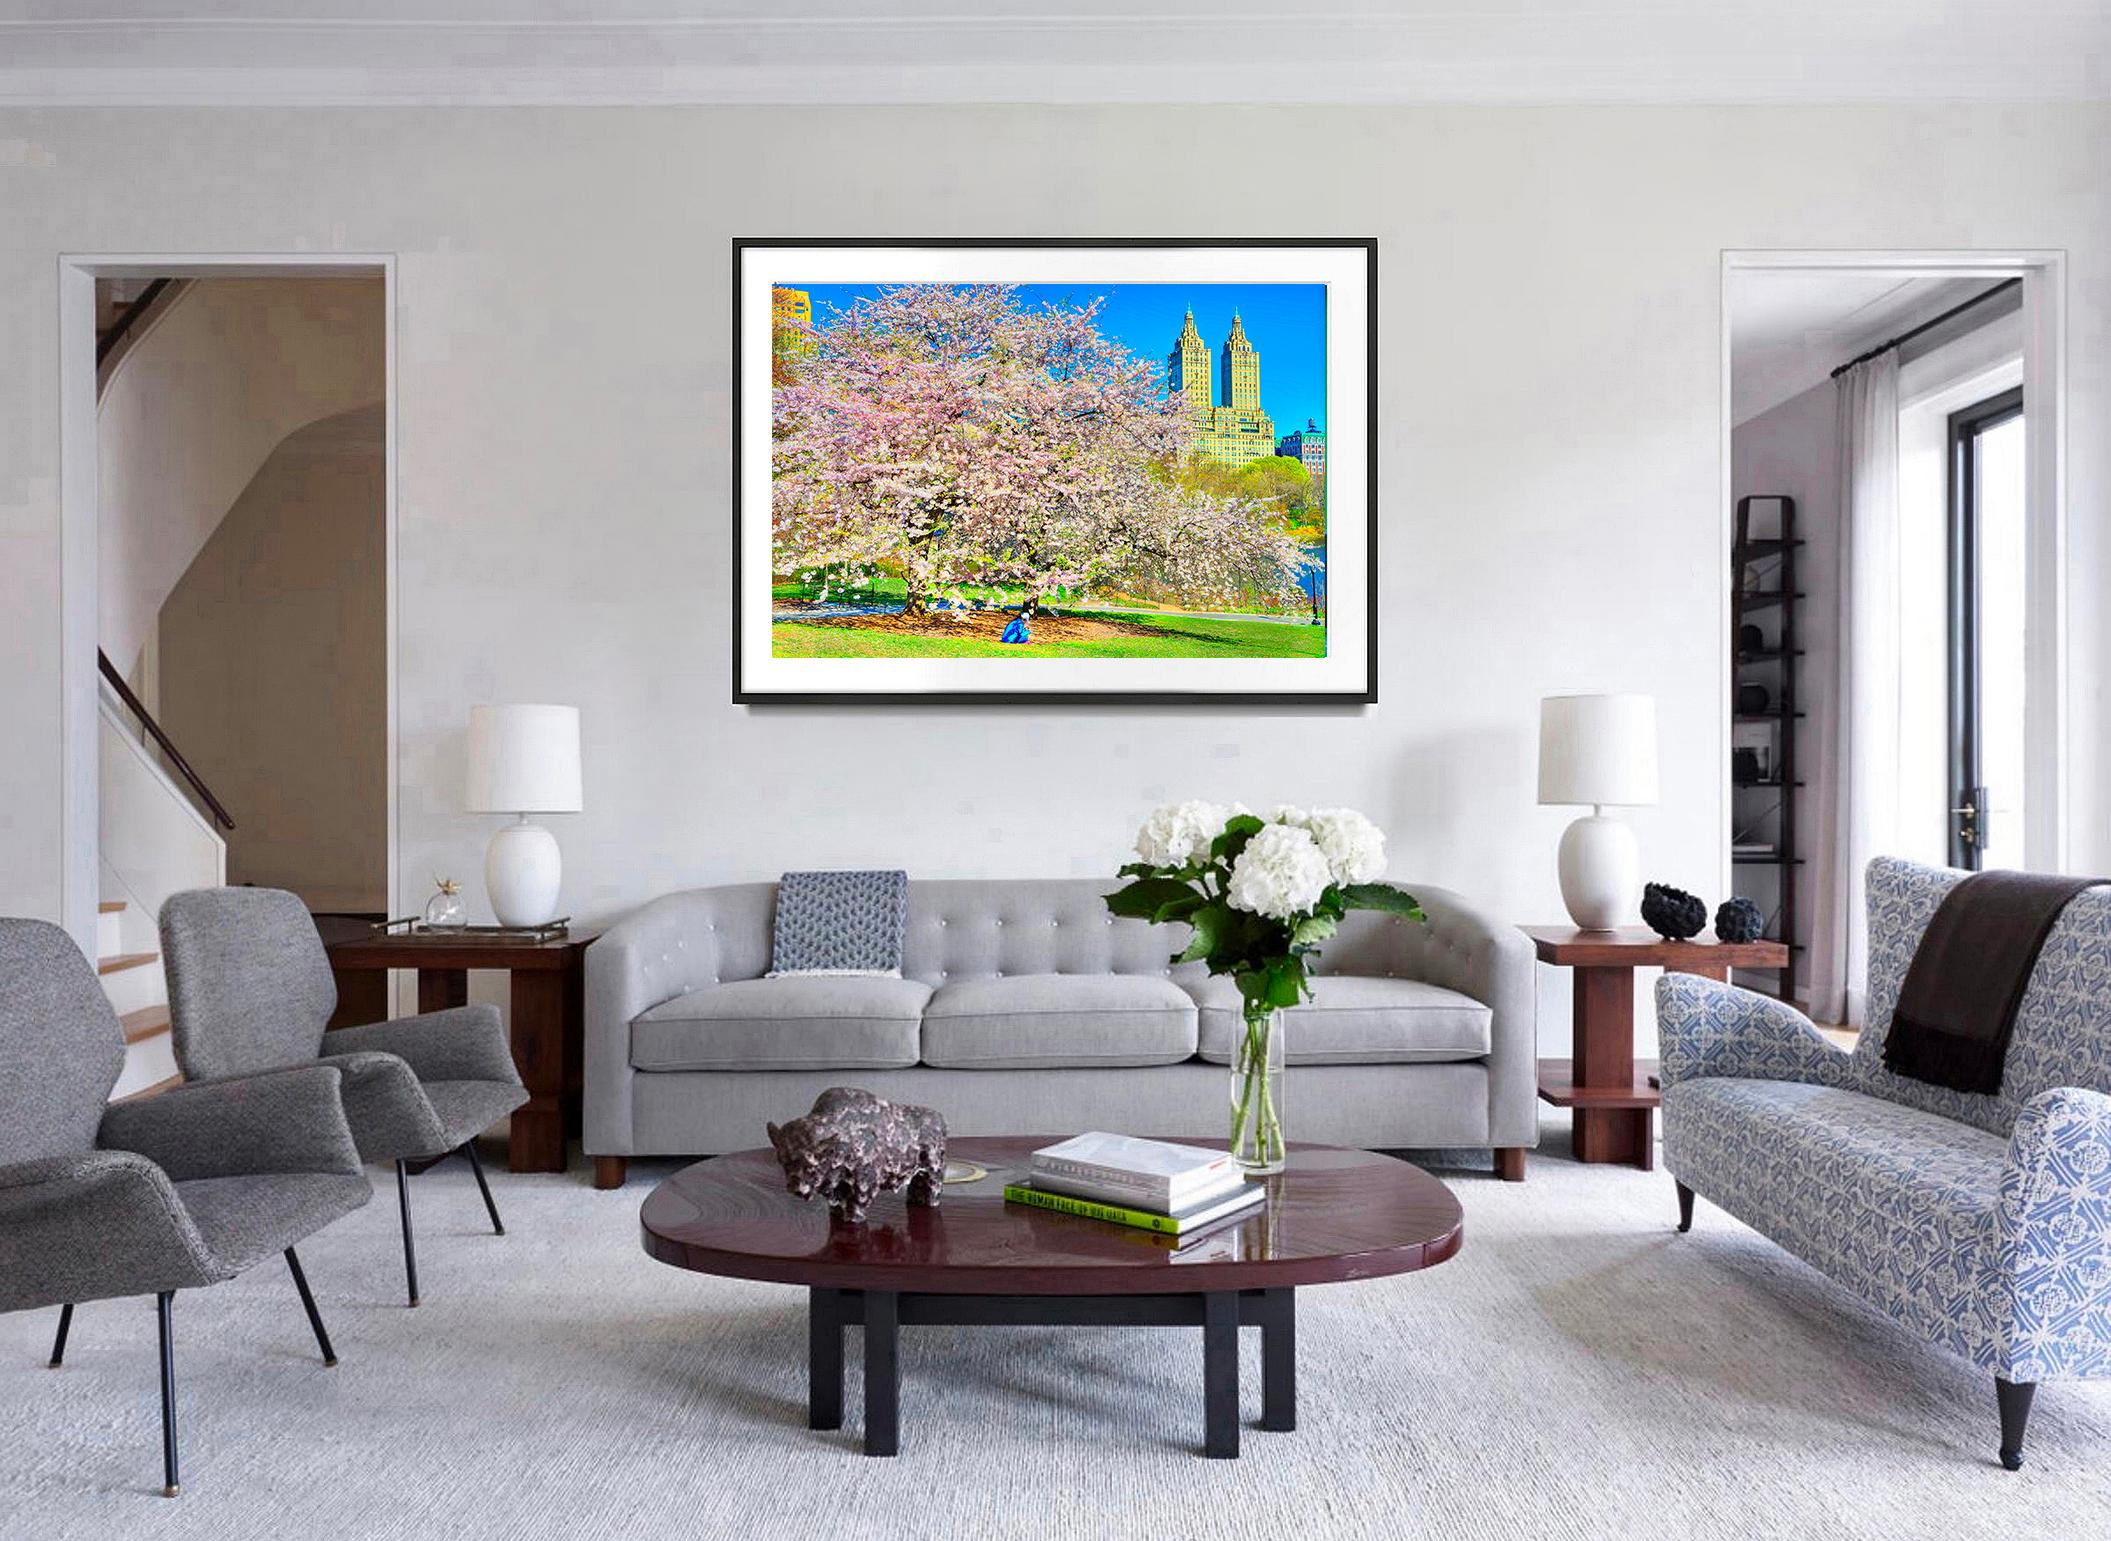 The majestic  Renaissance Revival San Remo Apartments act as a backdrop to Central Park's magnificent Cherry Blossom display. Under the colorful blooming tree, a sitting single female figure in blue is seen. Her blue shirt echoes the blue sky and